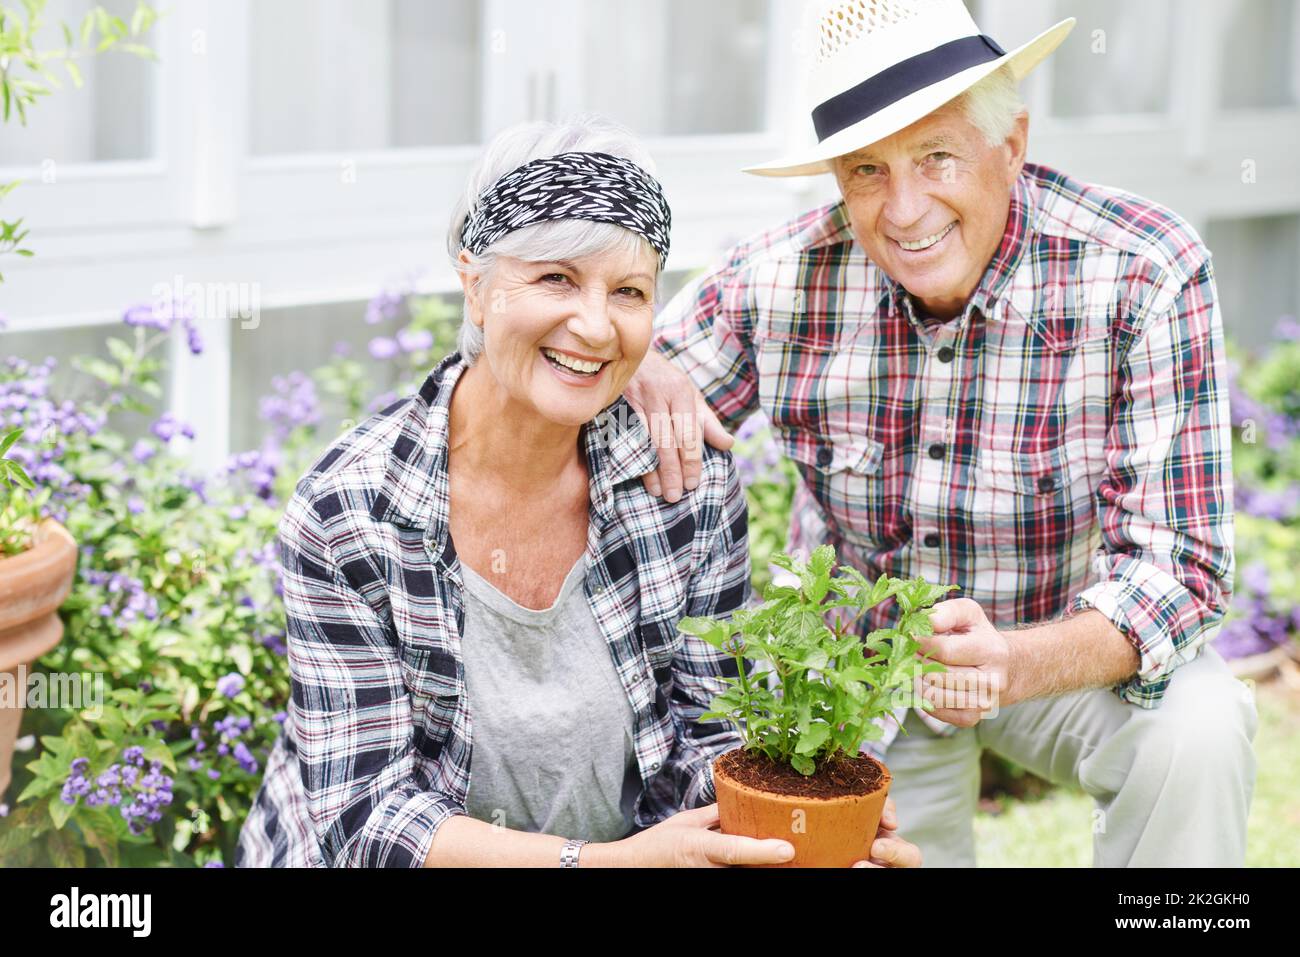 Fresh air and natures beauty keeps us young. A happy senior couple busy gardening in their back yard. Stock Photo